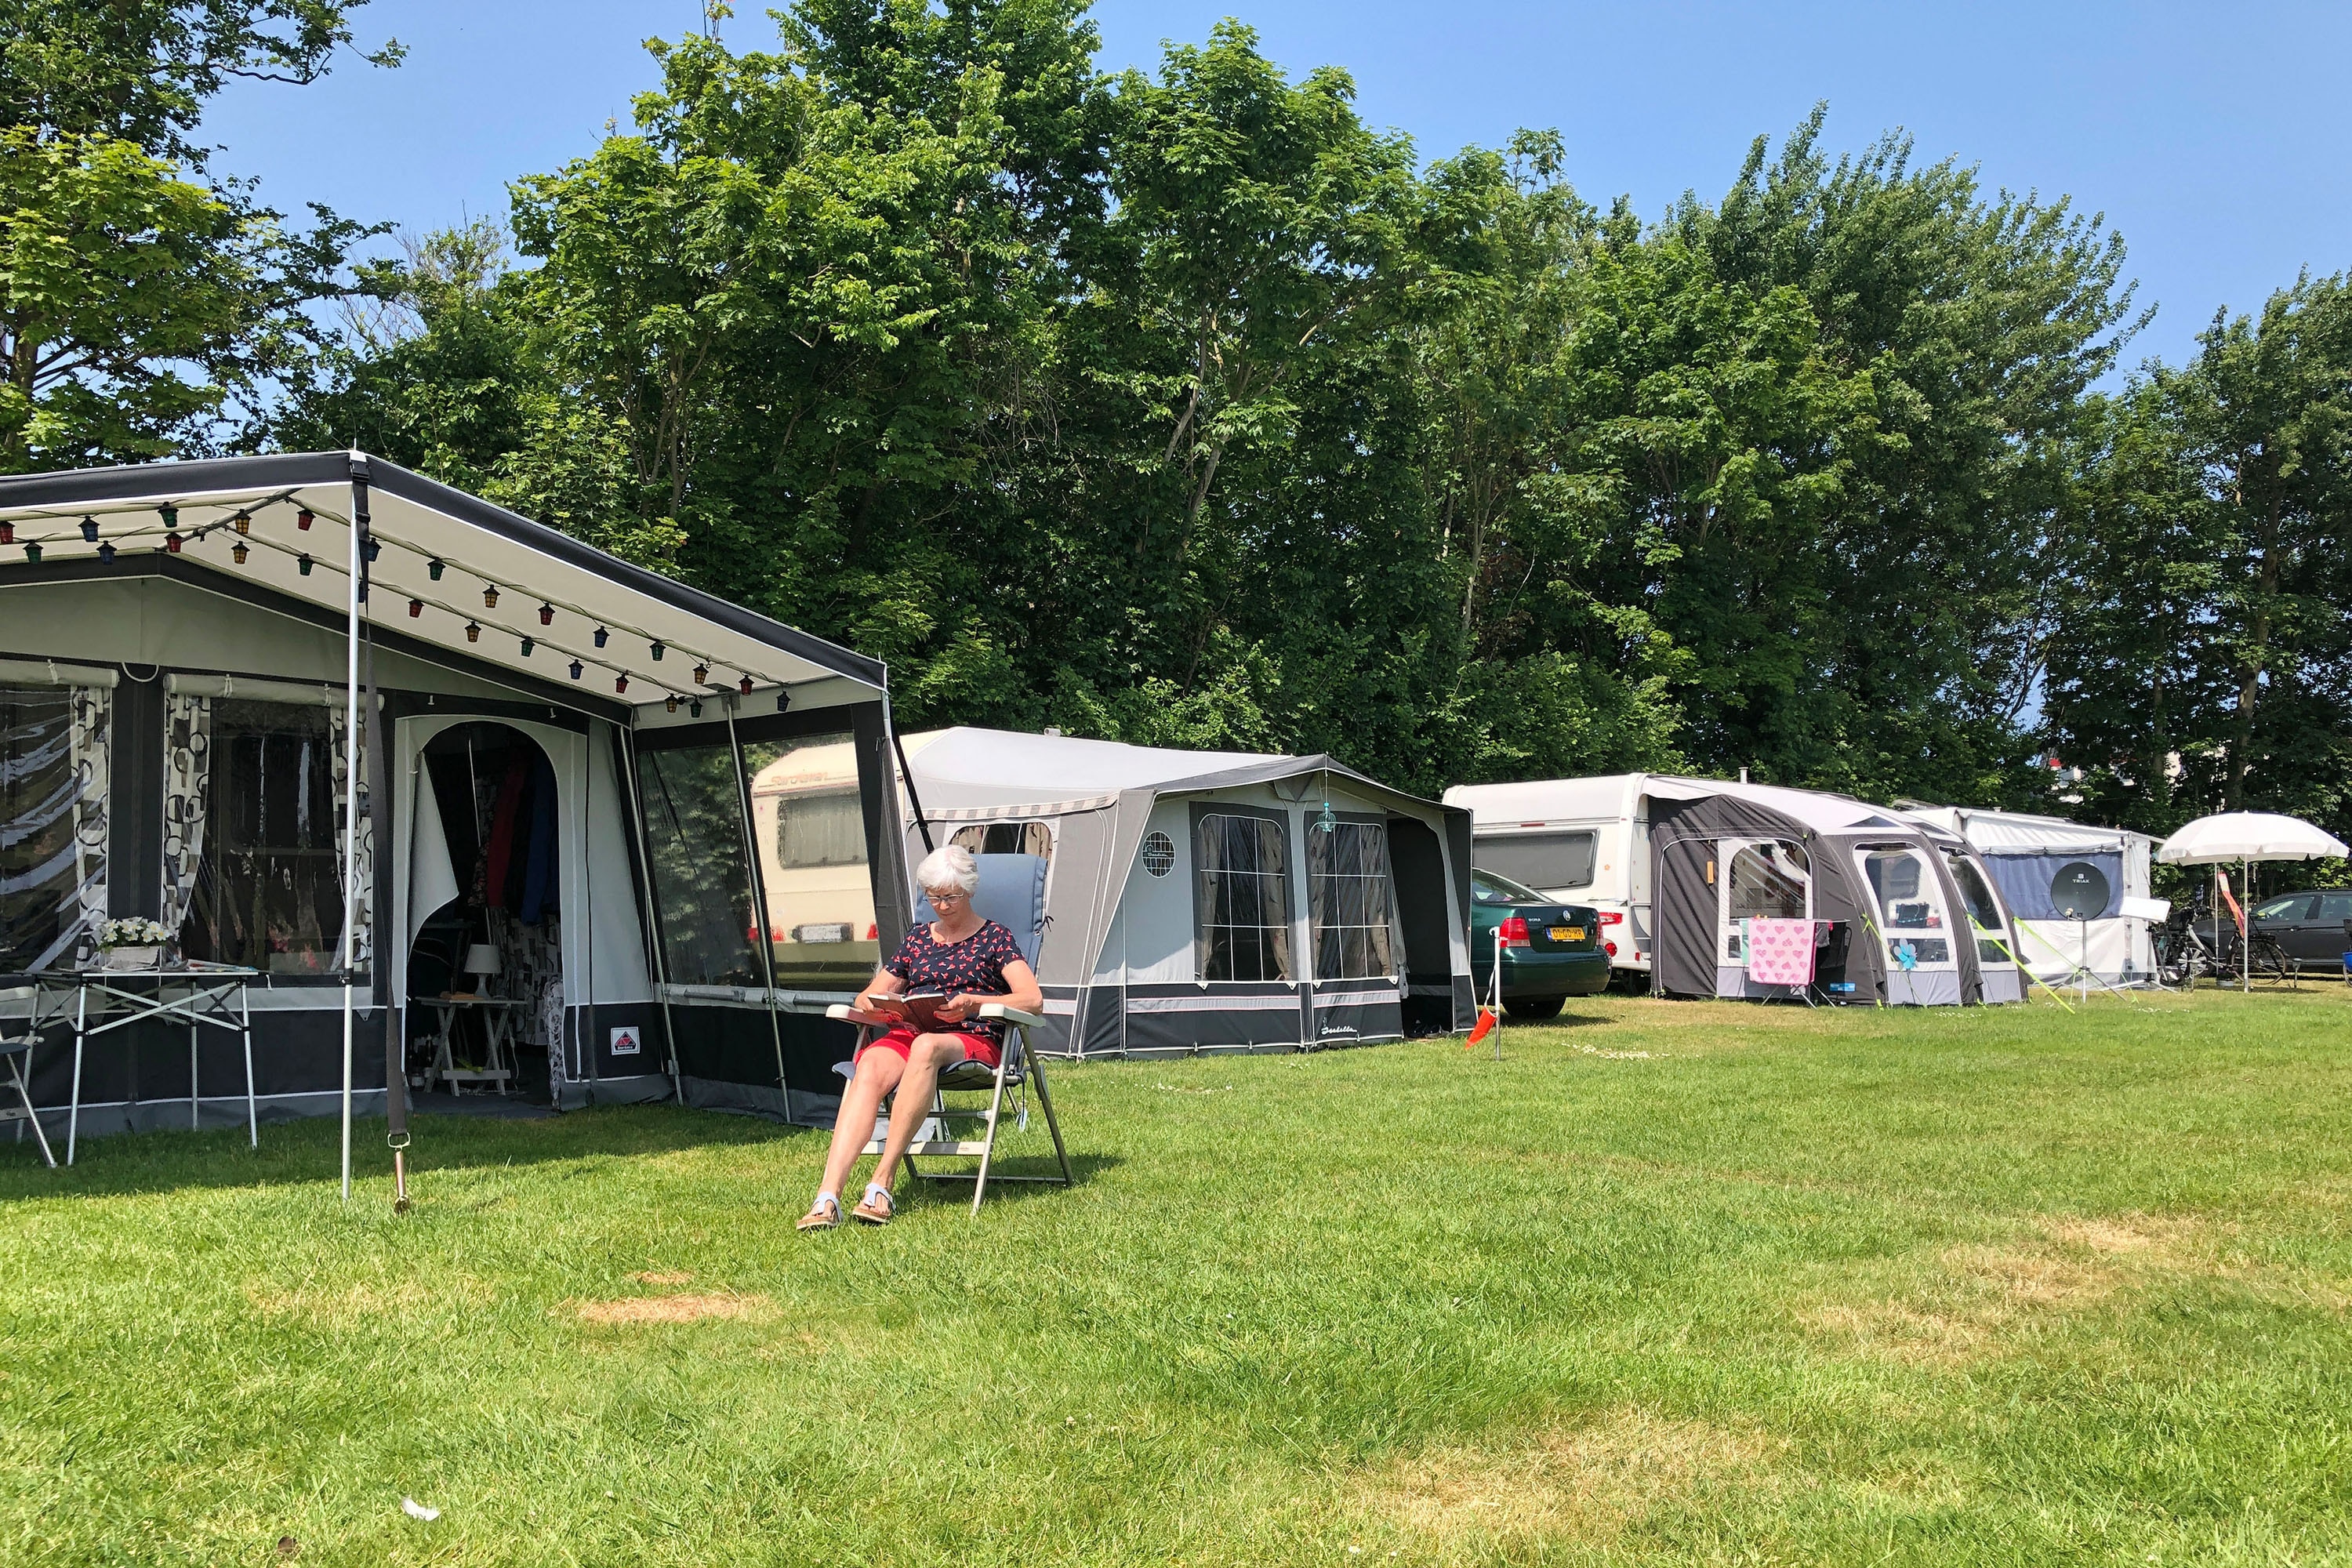 Camping Coogherveld Texel